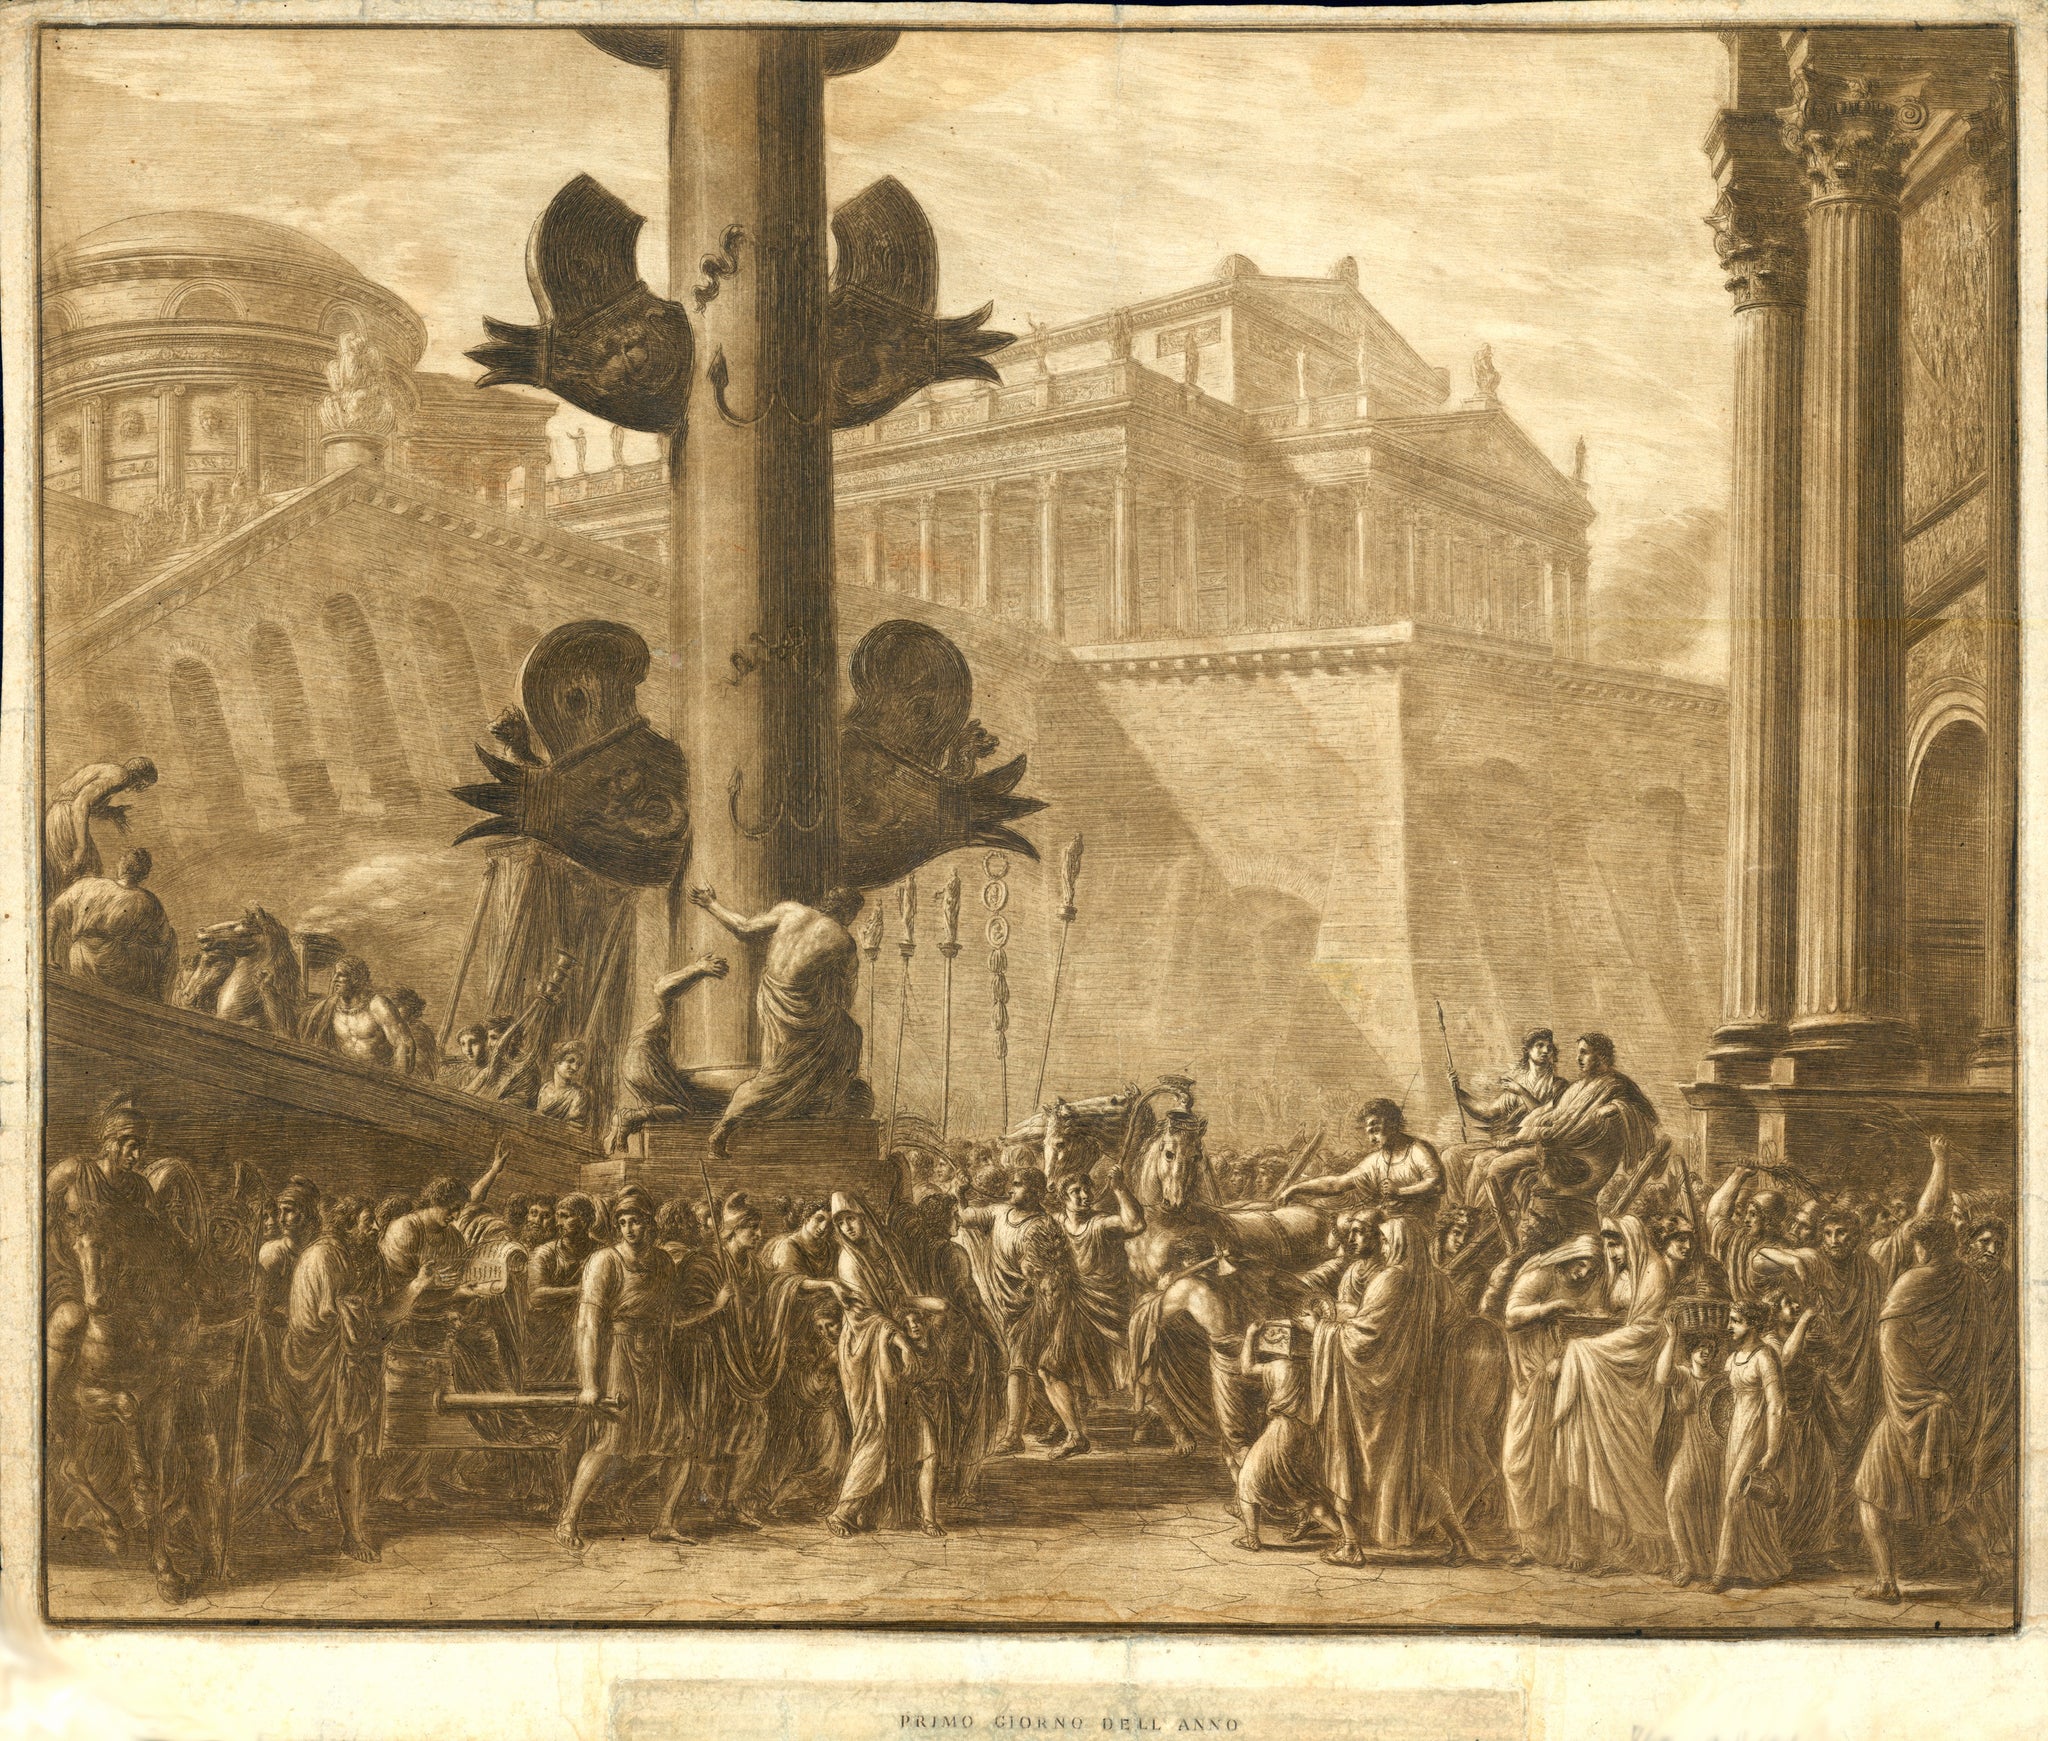 Rome. - "Primo Giorno del Anno"  Mezzotinta and copper etching in warm sepia color.  There is no credit for artist, nor name of publisher. We have checked the internet up and down, also the publicized inventory of the British Library, usually a sure source of knowledge. But we could not find a single hint for this beautiful print. So we have to stay vague - unless a reader of this can help. Any hint is very welcome.